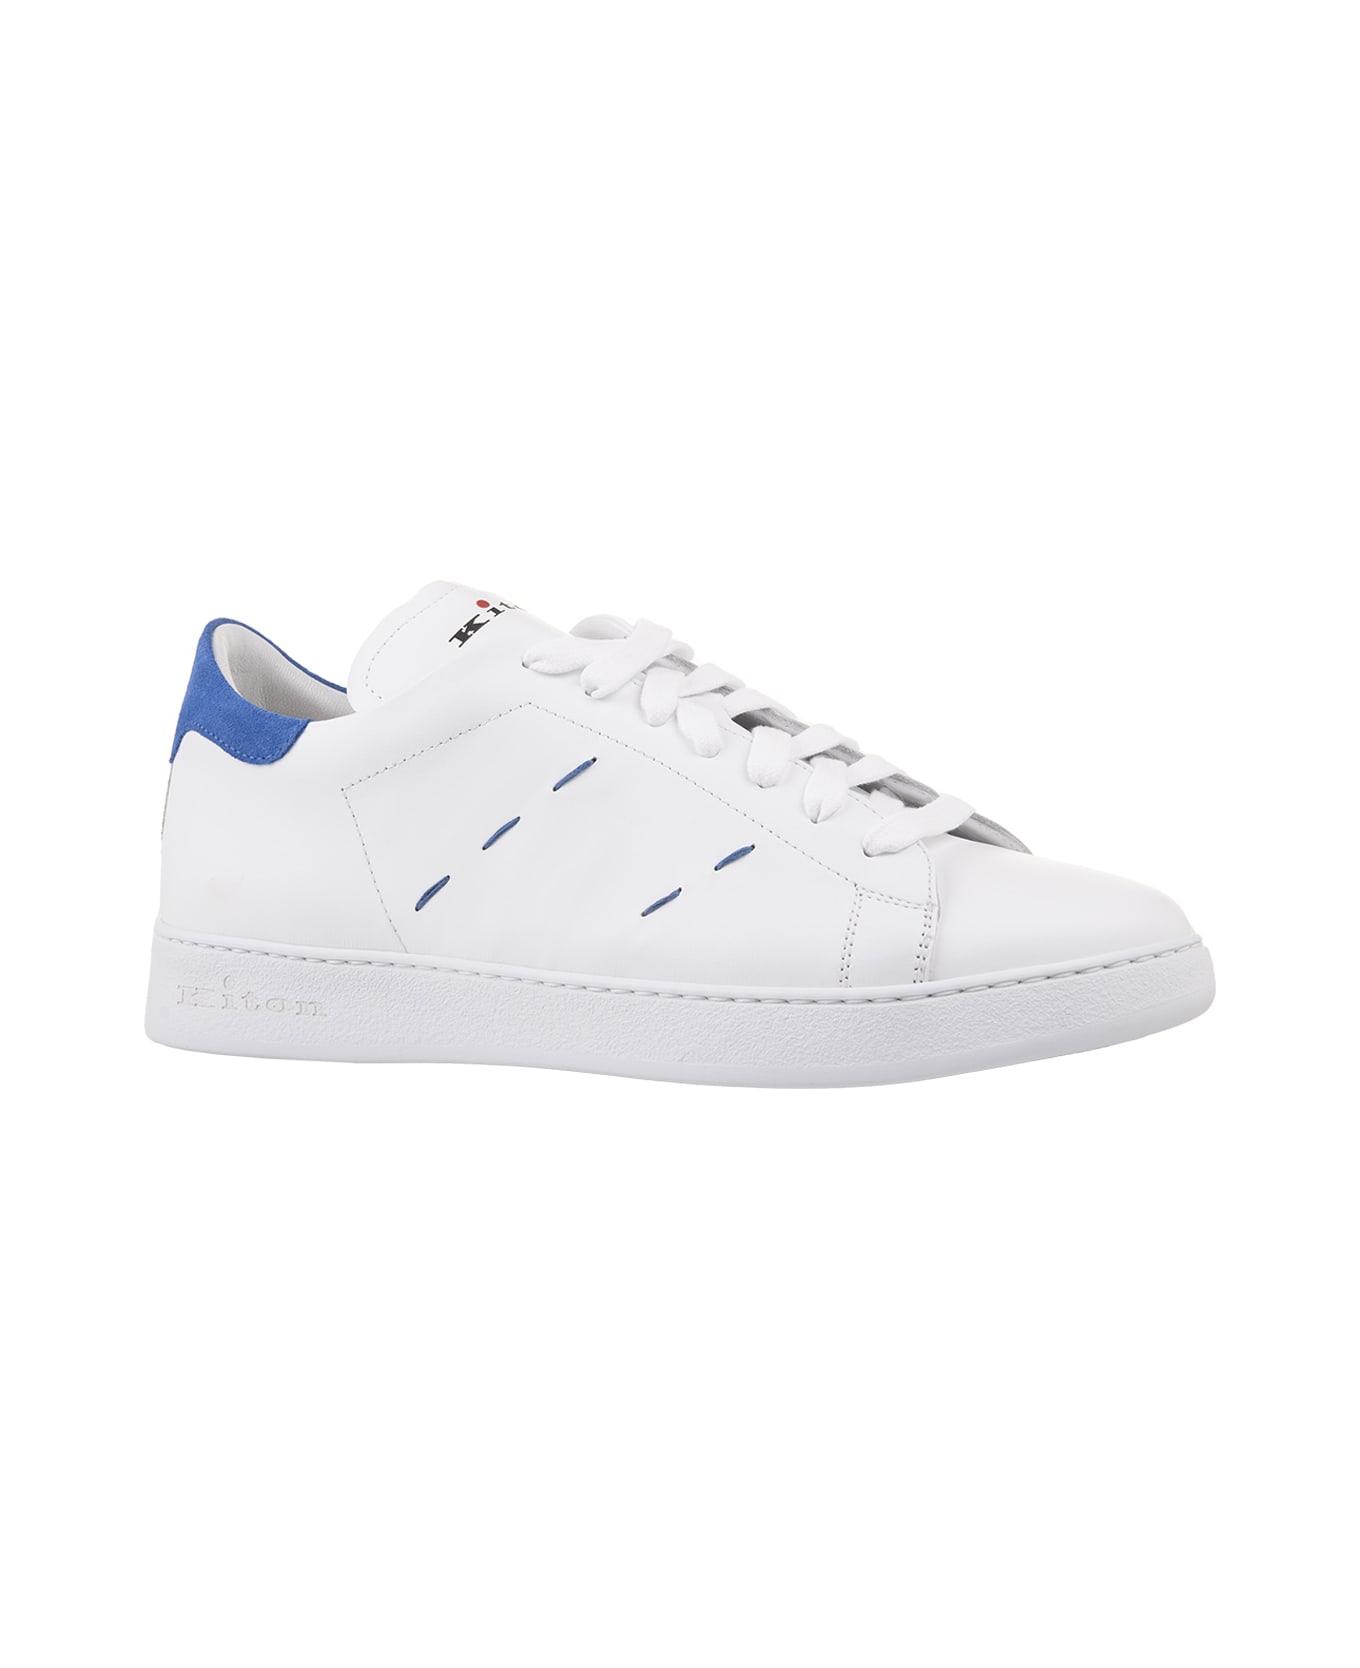 Kiton White Leather Sneakers With Blue Details - Blue スニーカー